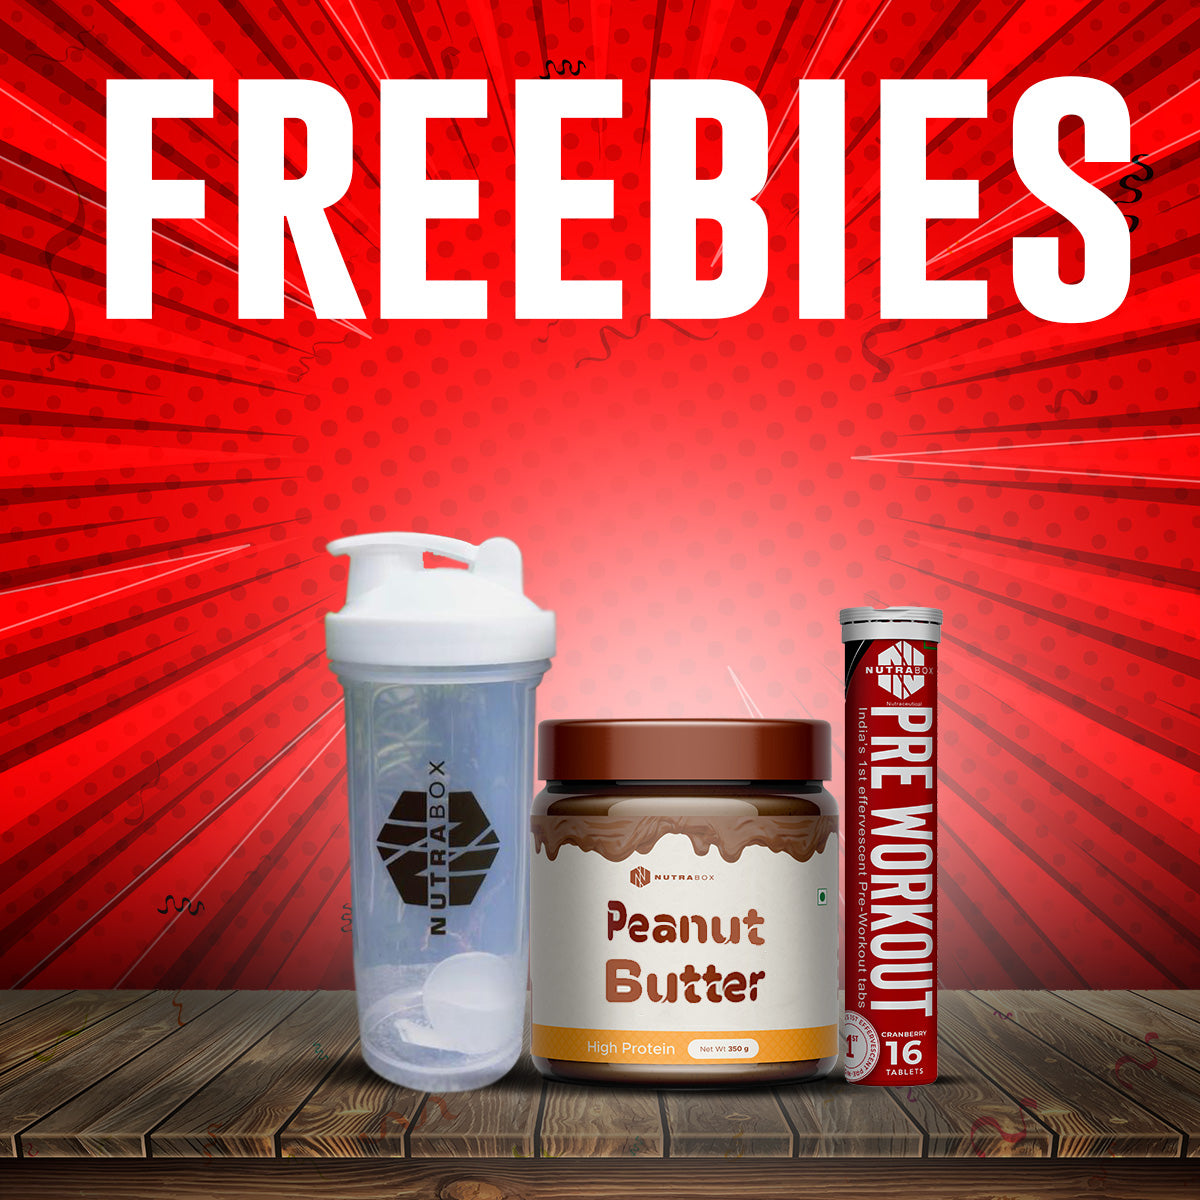 Freebies with Raw Whey Isolate